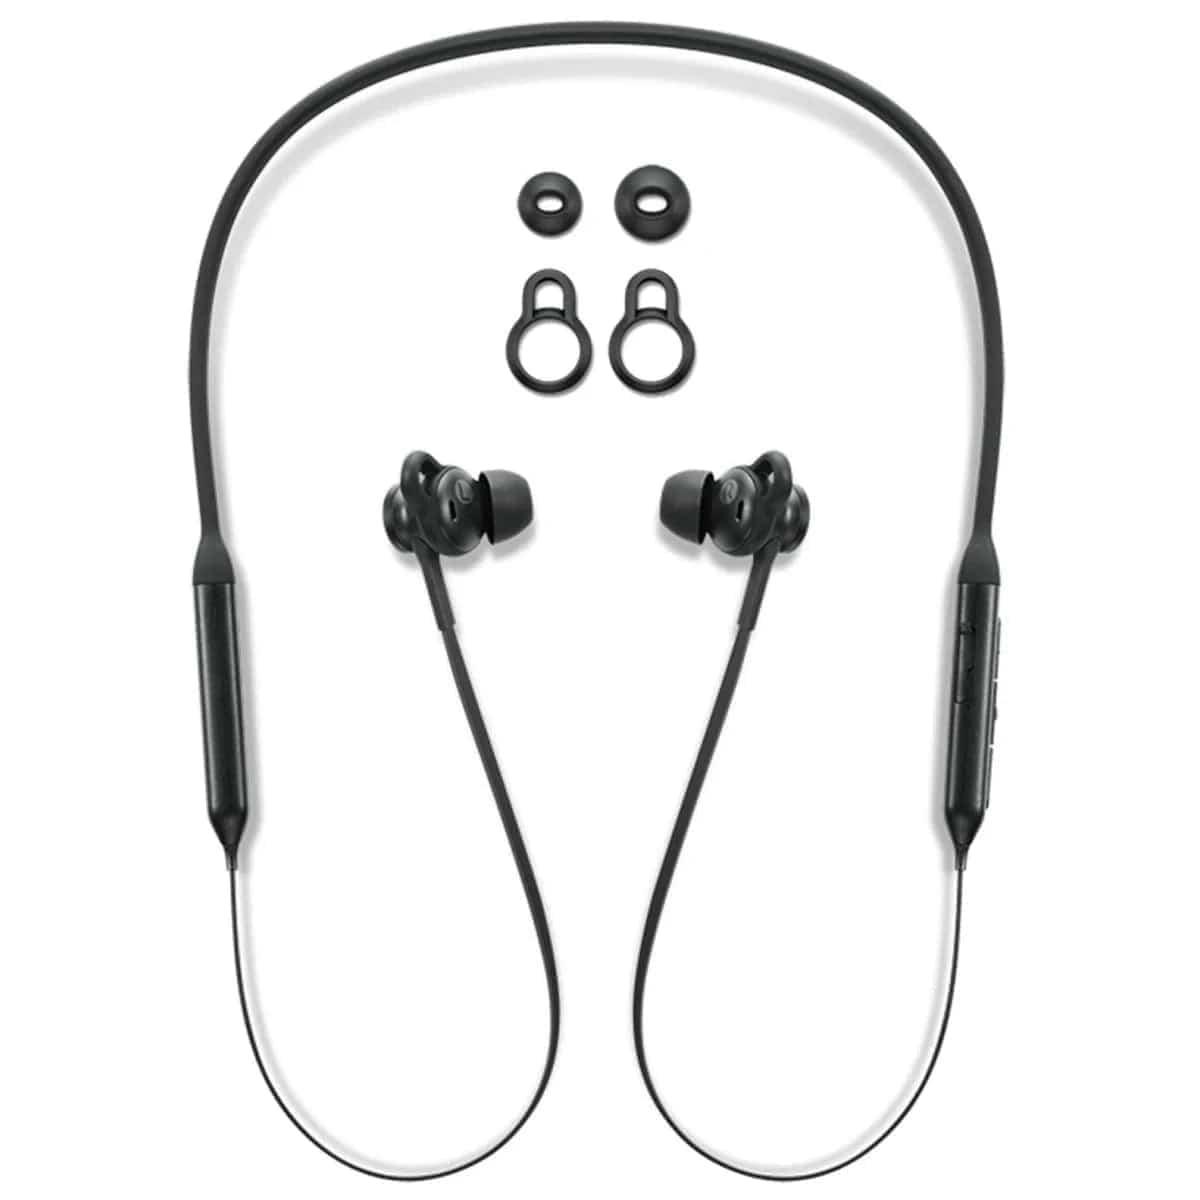 LENOVO headset Lenovo 500 Bluetooth in-Ear Headphones Integrated Microphone Dual-Device Pairing 10 Hours Playback - Black 4XD1B65028